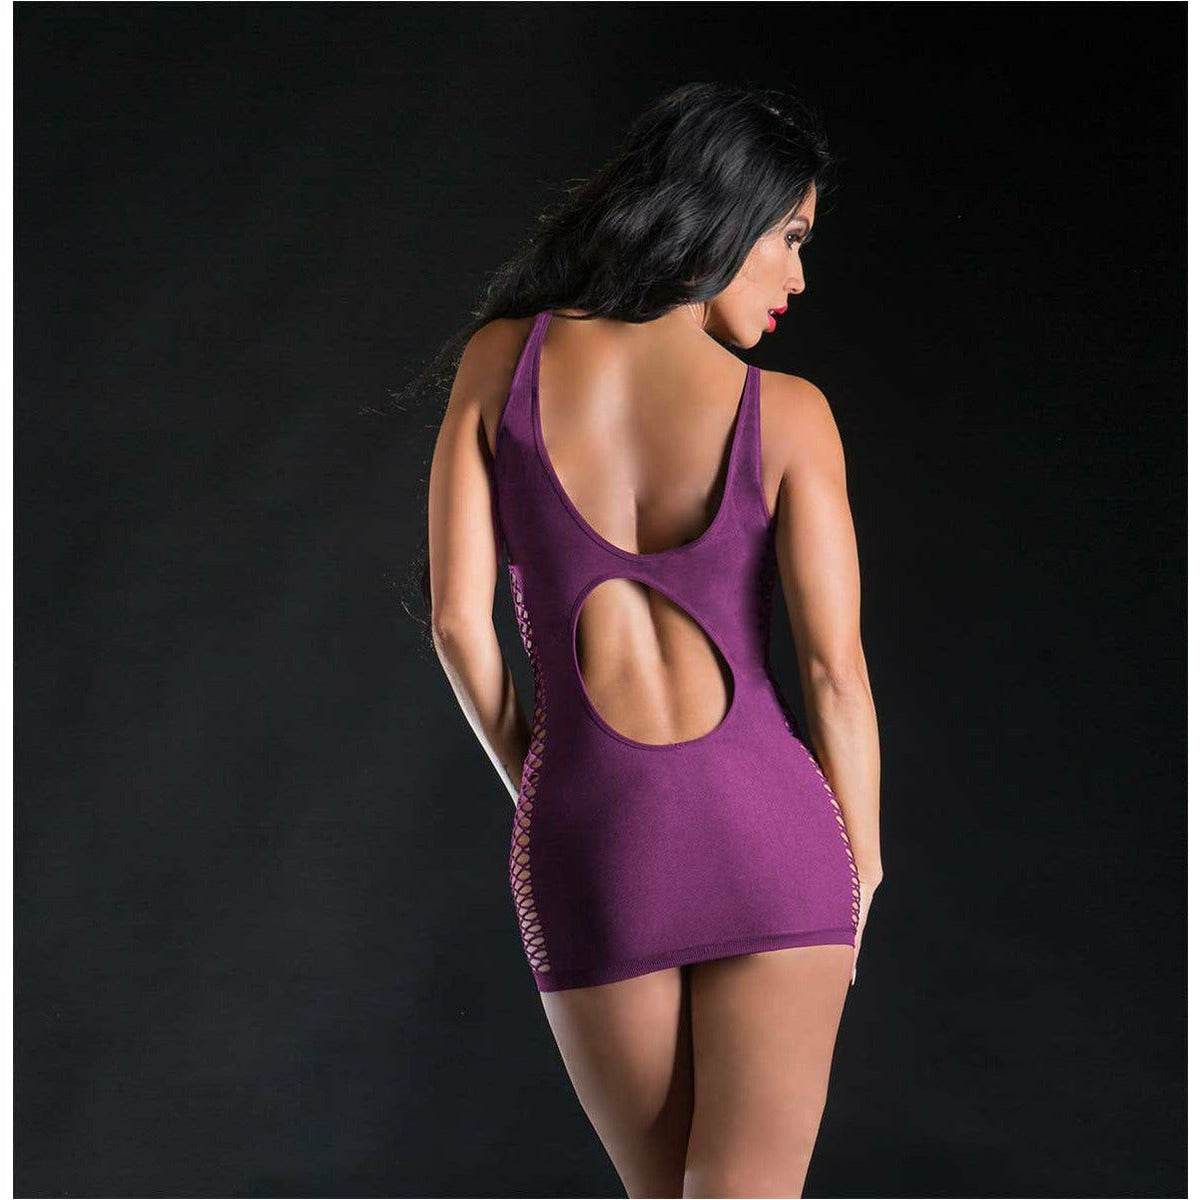 Beverly Hills Naughty Girl - Side Mesh Dress with Wild Design - Purple - One Size